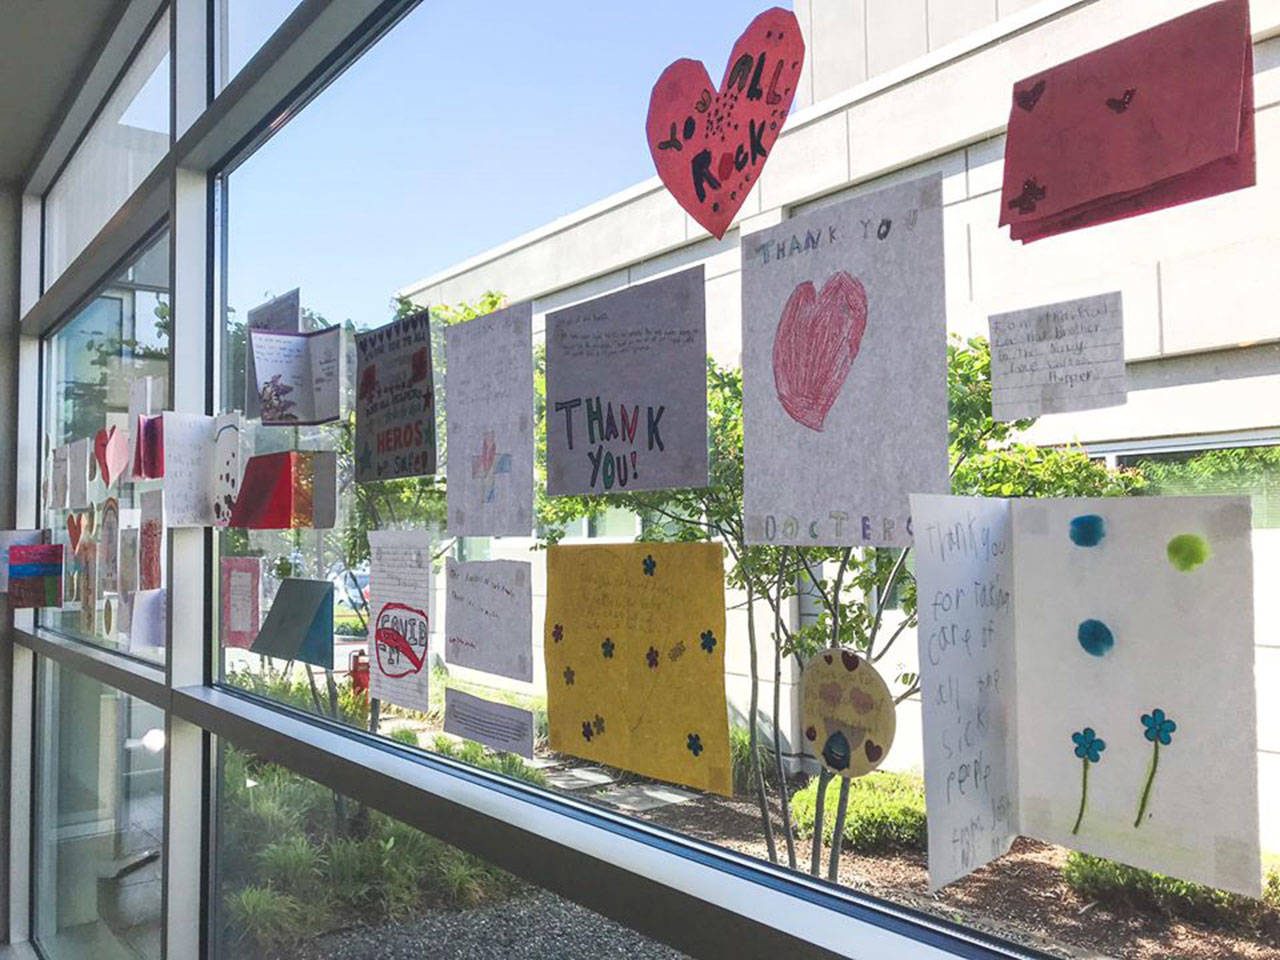 Cards and notes created by students at Jefferson and Roosevelt elementary schools in Port Angeles encourage Olympic Medical Center staff. Photo courtesy of Shenna Younger/Olympic Medical Center